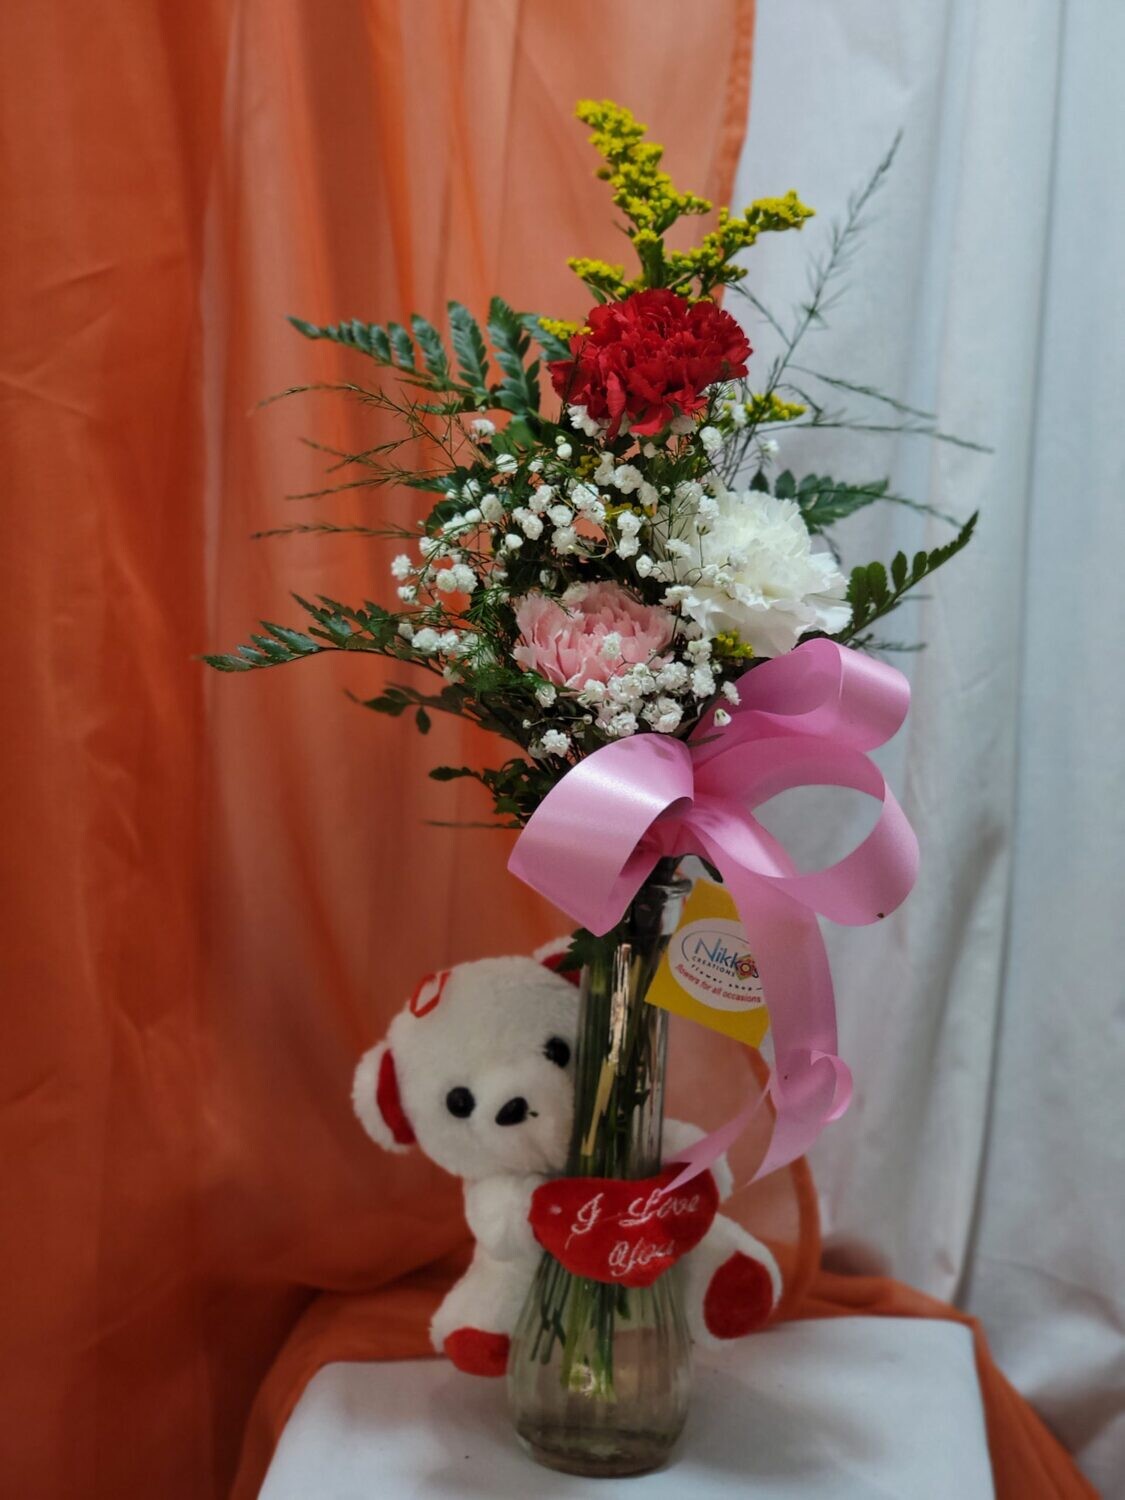 3 Carnations in a vase with a small Teddy